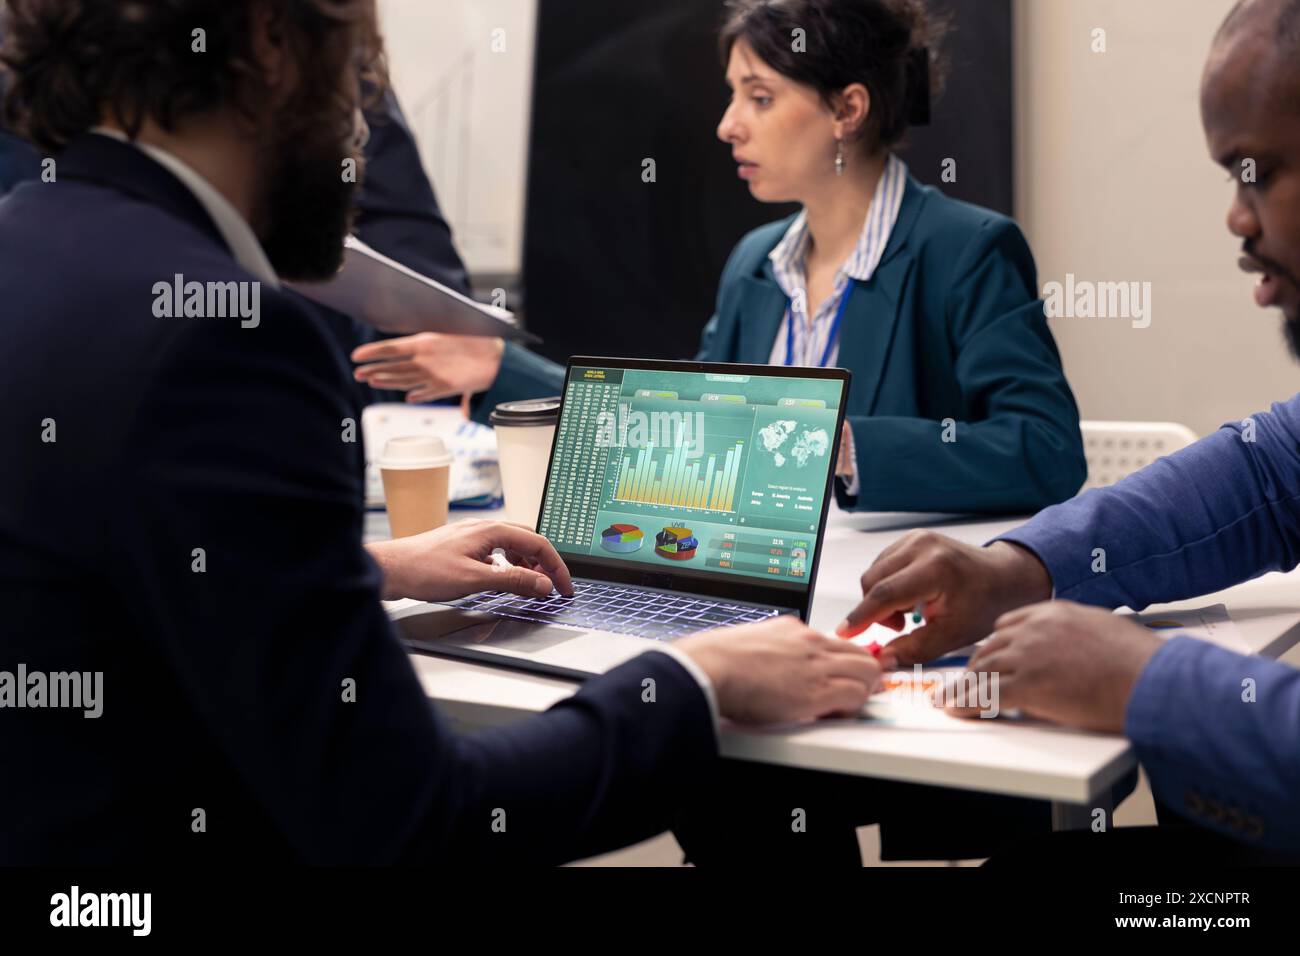 Marketing team developing new digital transformation strategies in a boardroom conference, enhance operational efficiency and performance. Professionals improve organizational workflow. Stock Photo